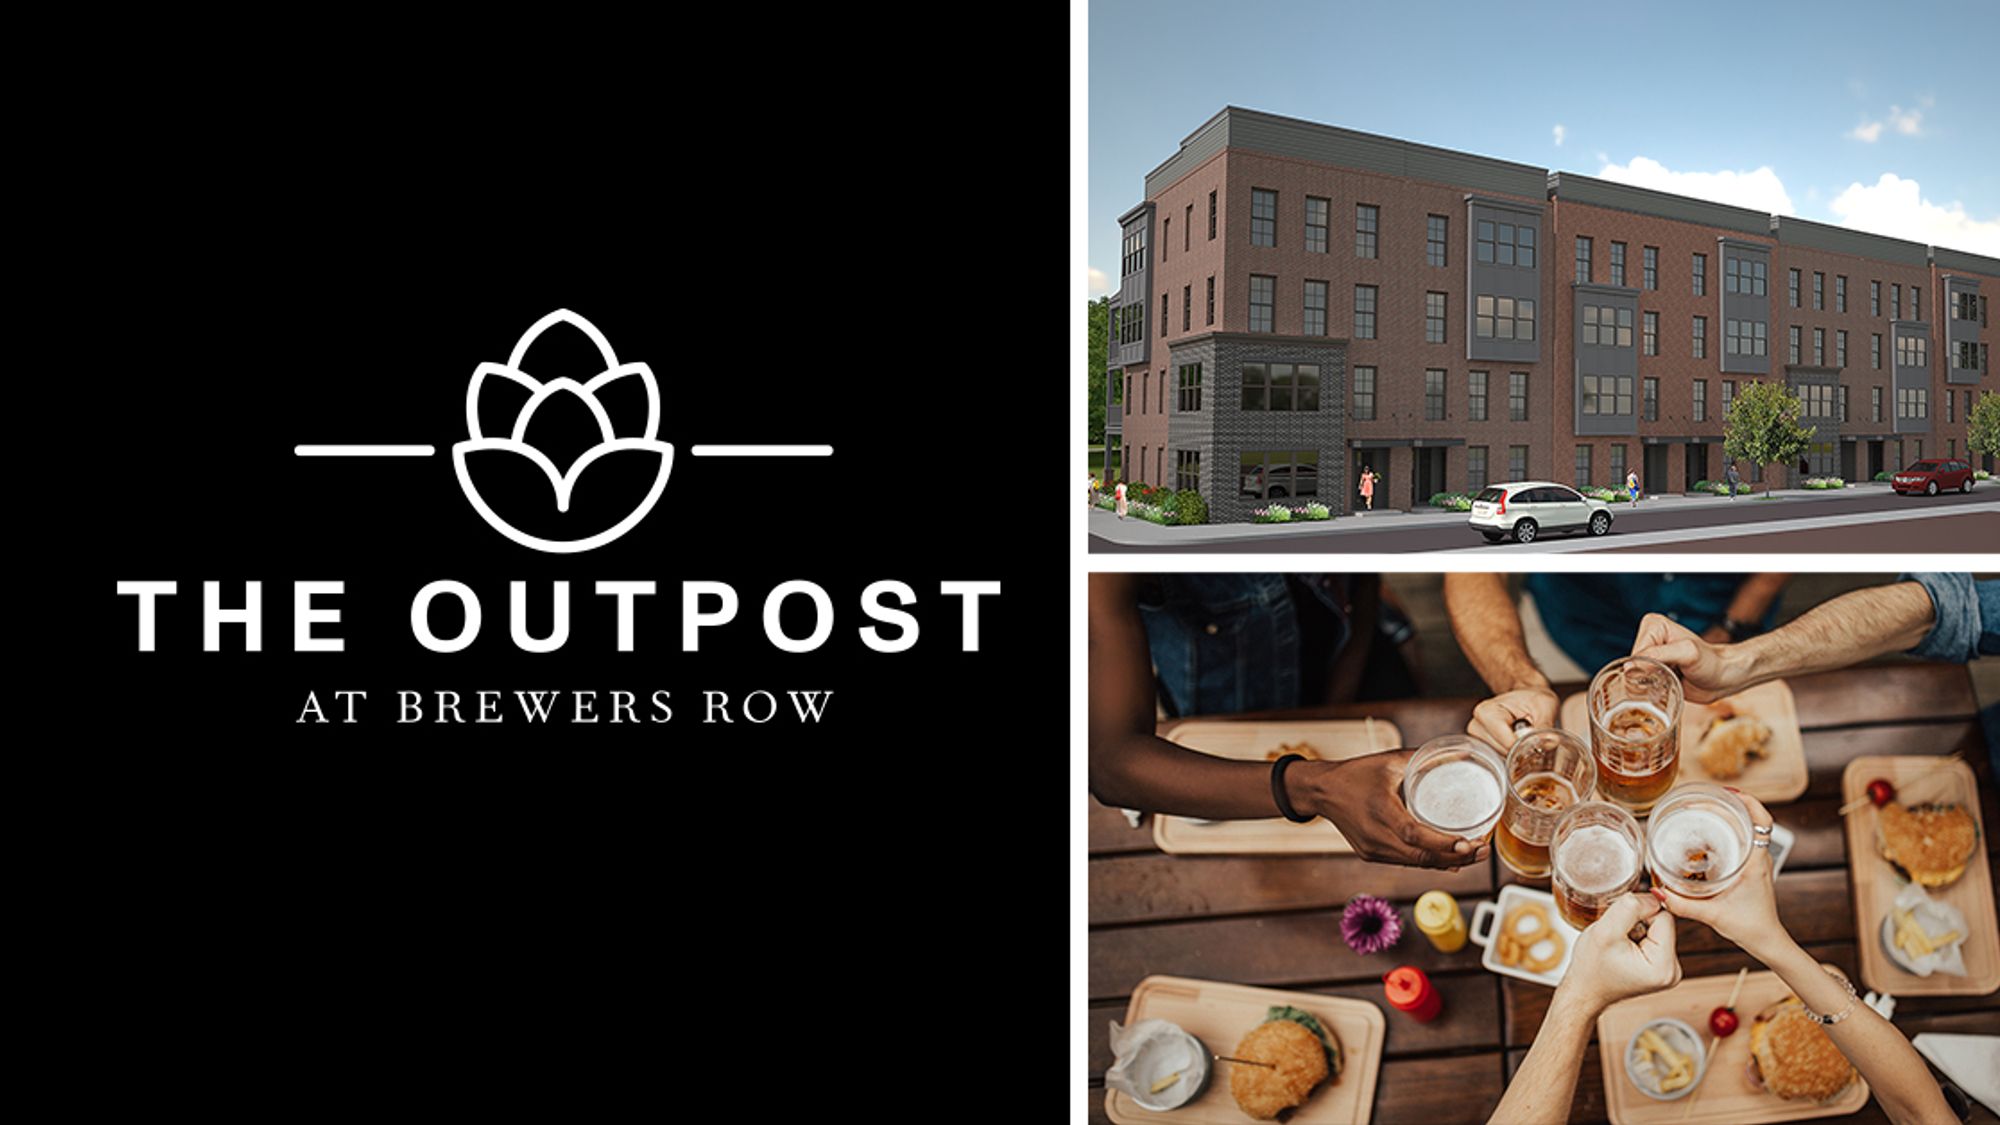 The Outpost at Brewers Row in Scott's Addition, VA